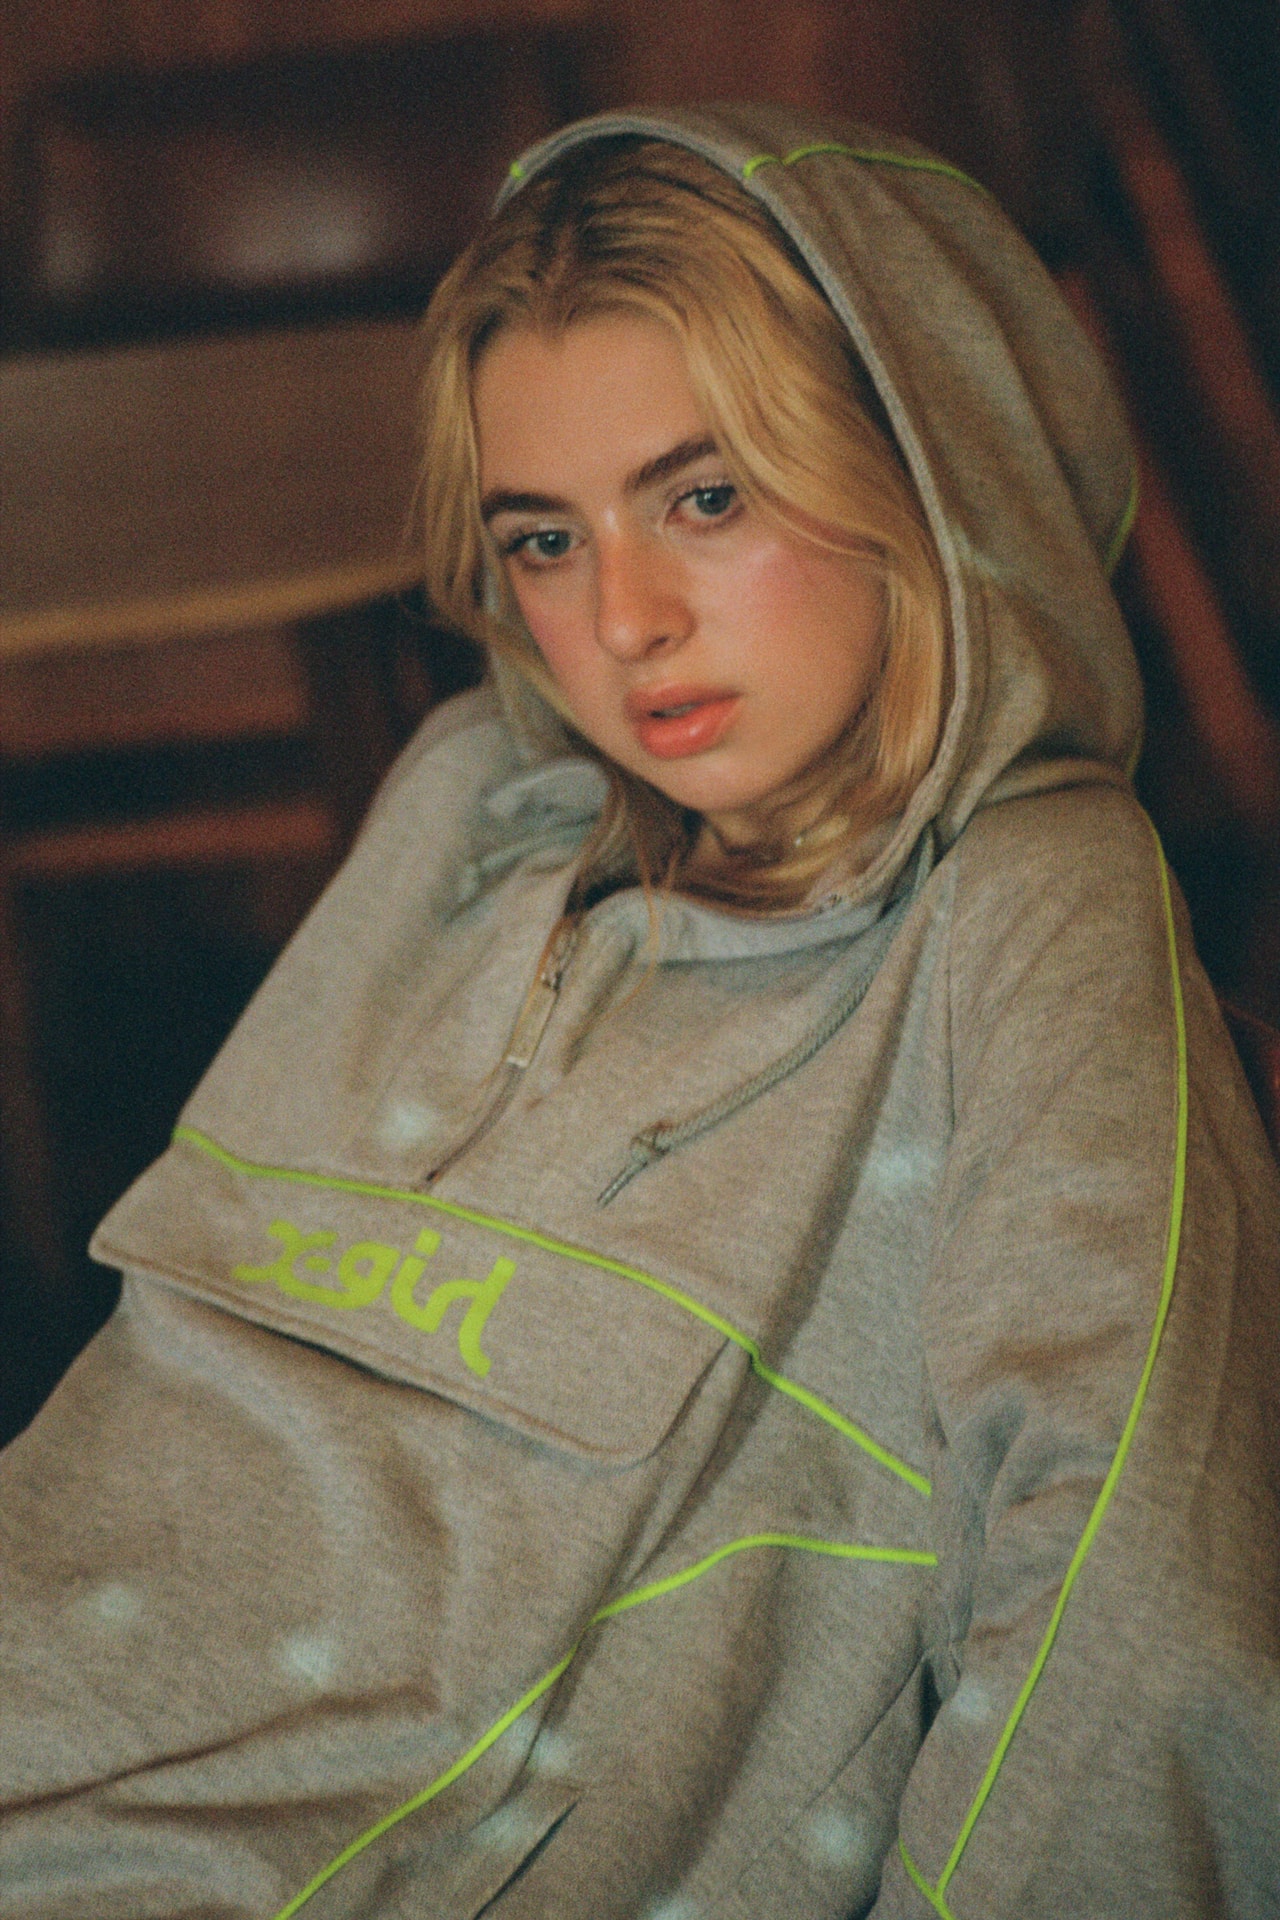 X-Girl Fall Winter 2018 Collection Anais Gallagher Campaign Hoodie Grey Green